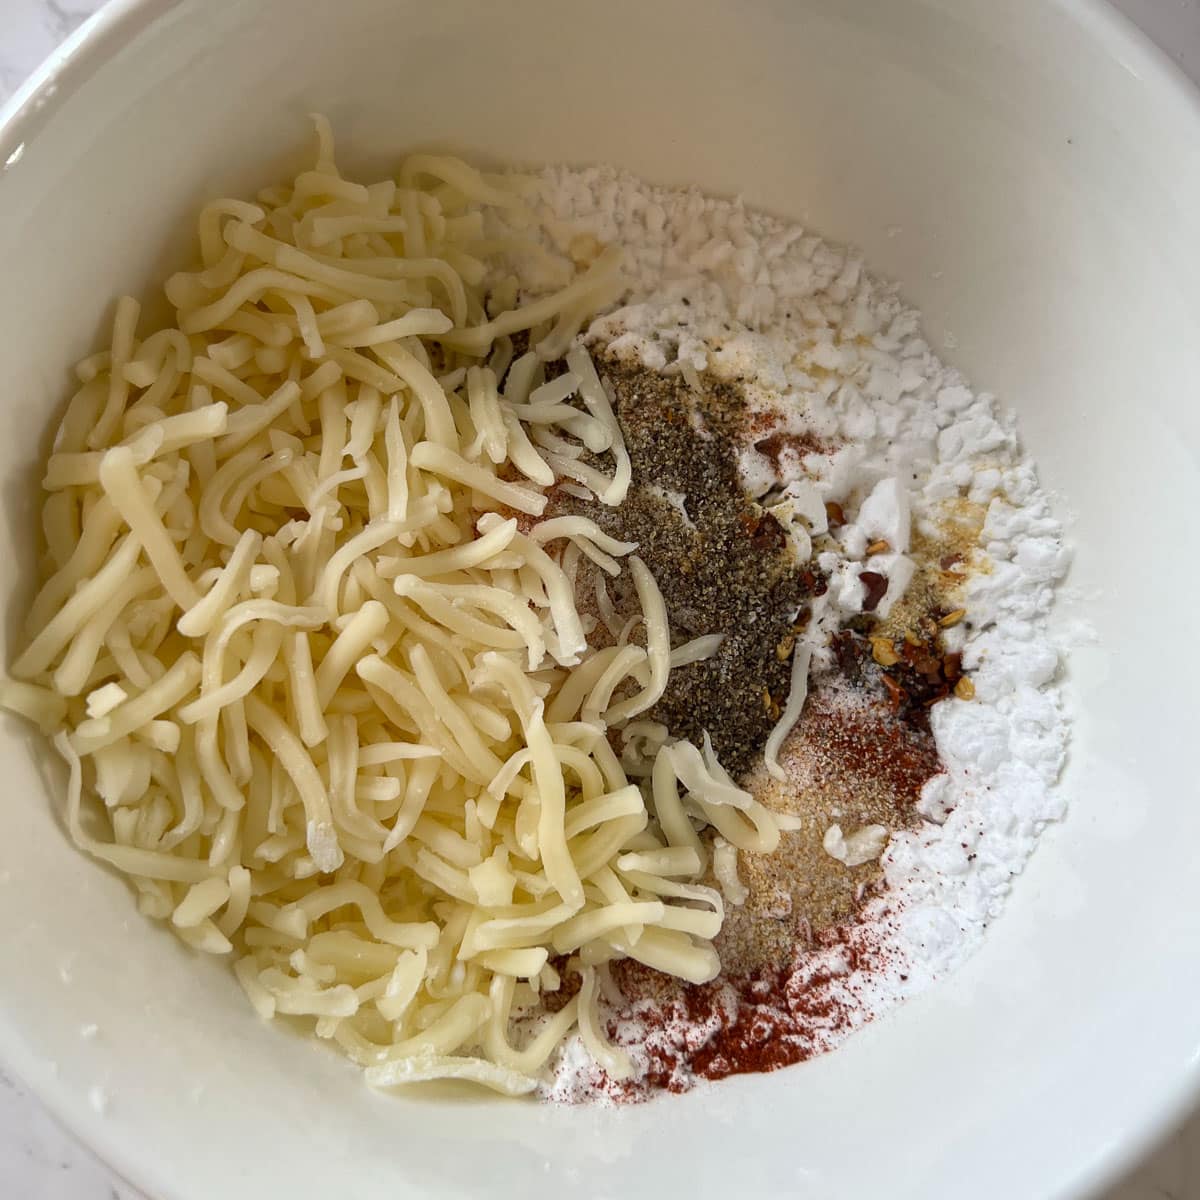 cheese and powdered ingredients unmixed in a bowl